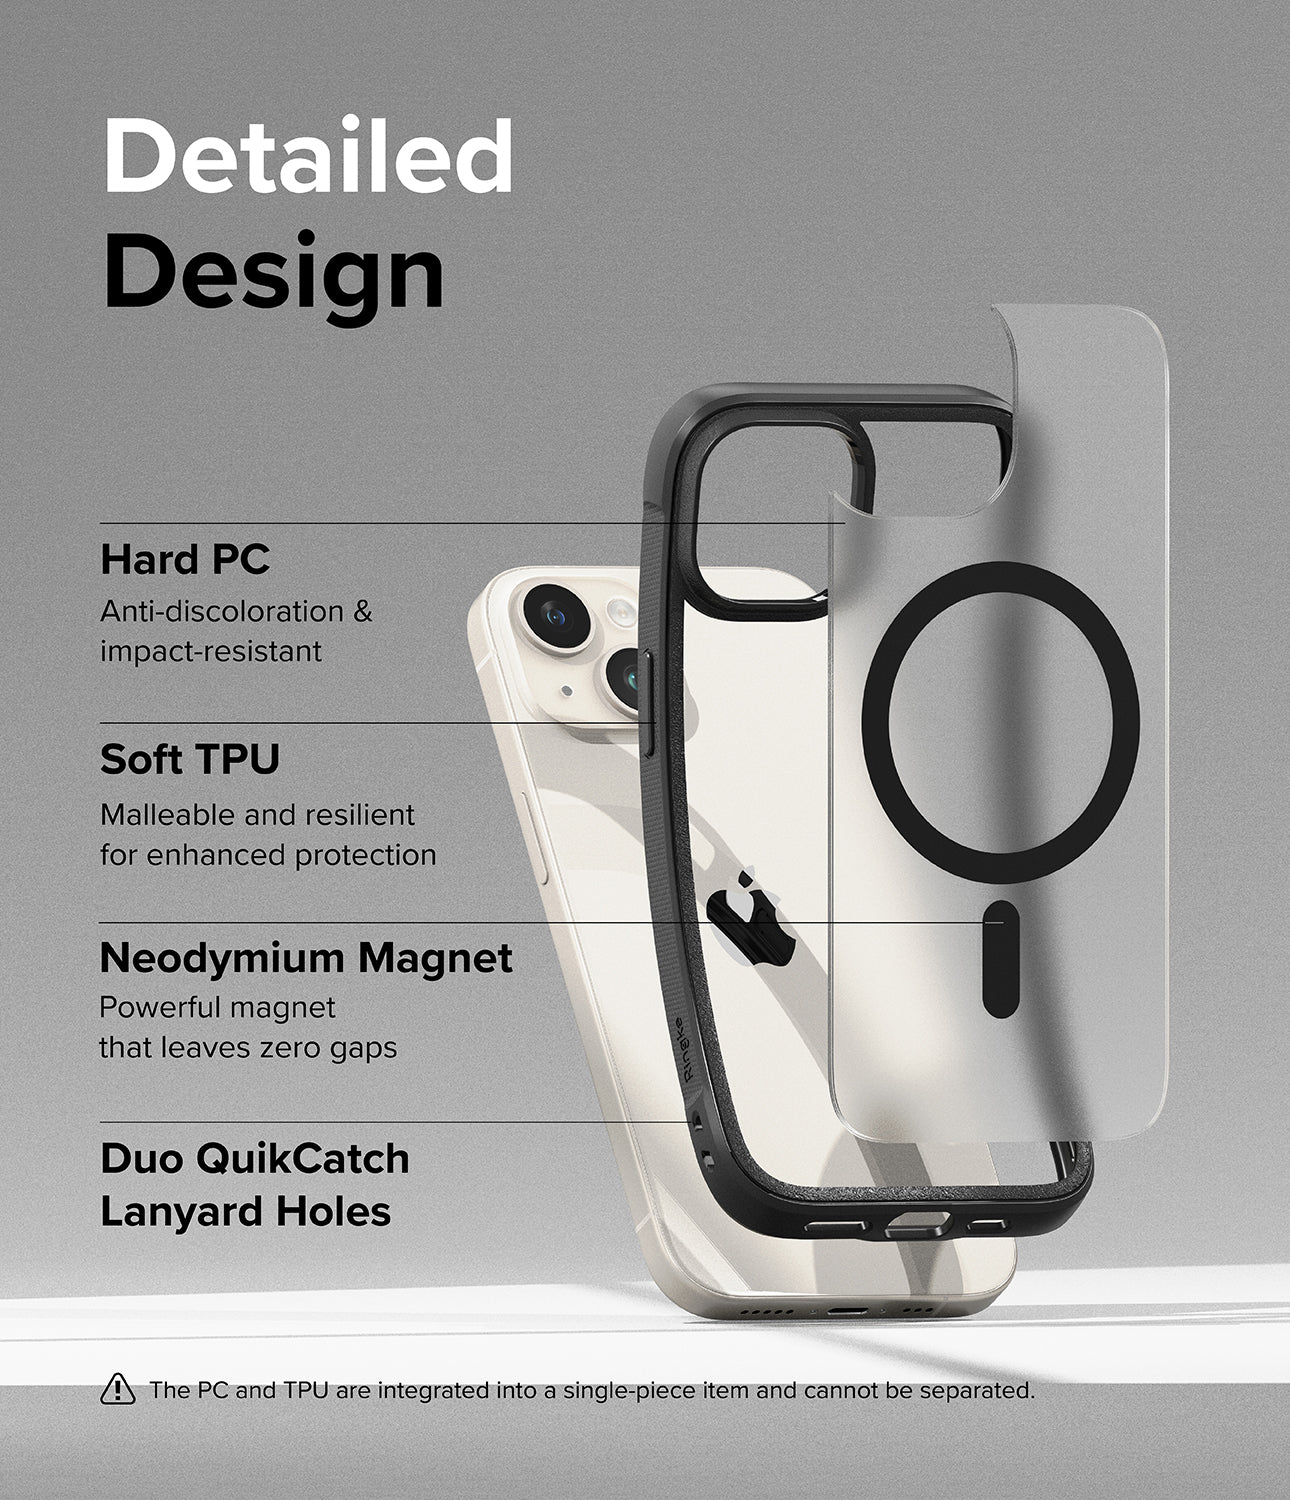 iPhone 15 Case | Fusion Bold Magnetic - Detailed Design. Anti-discoloration and impact-resistant with Hard PC. Malleable and resilient for enhanced protection with Soft TPU. Powerful Neodymium Magnet that leaves zero gaps. Duo QuikCatch Lanyard Holes.